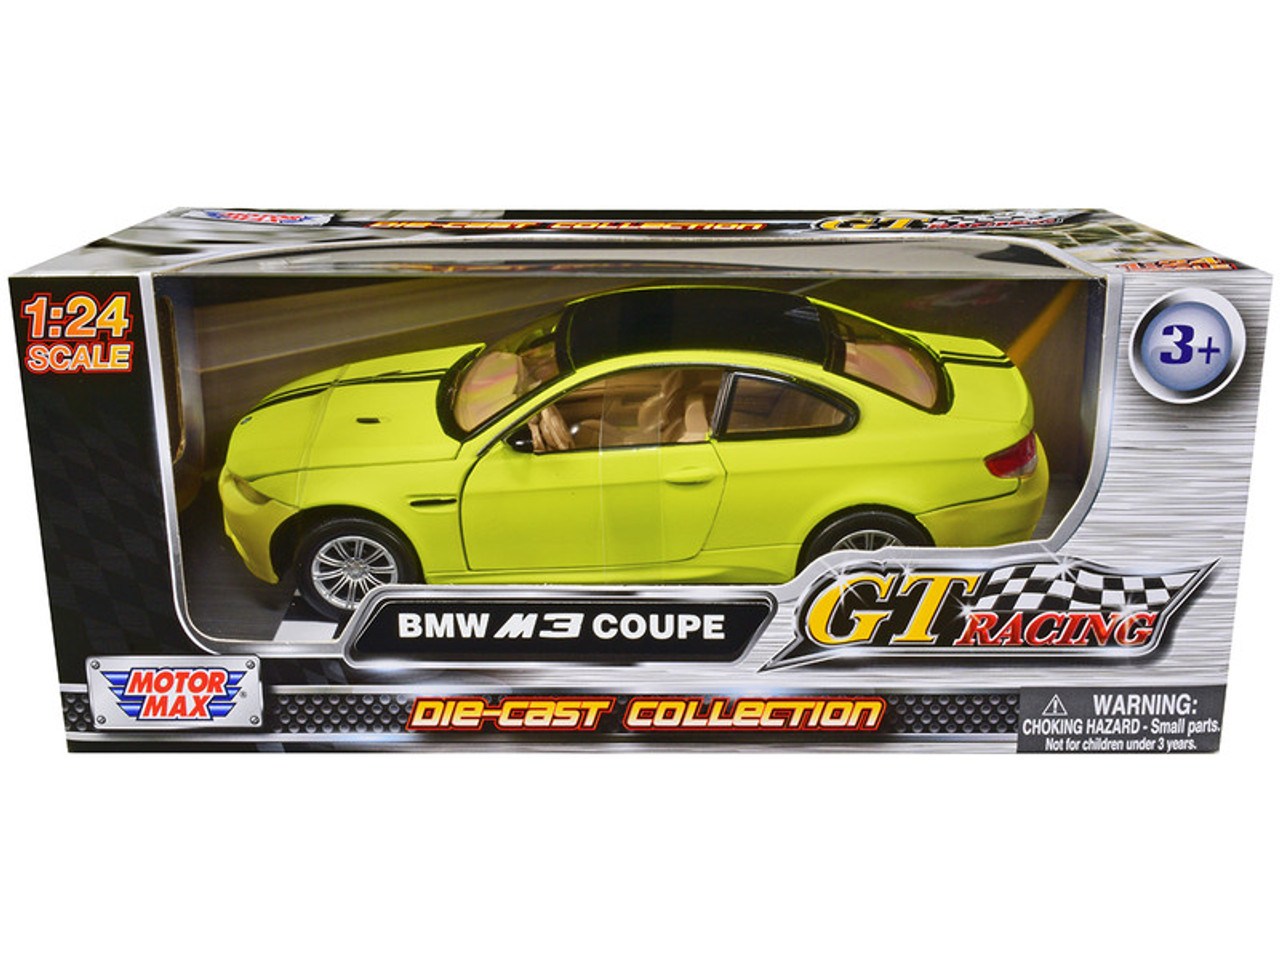 BMW M3 Coupe Neon Yellow with Matt Black Top and Stripes "GT Racing" Series 1/24 Diecast Model Car by Motormax